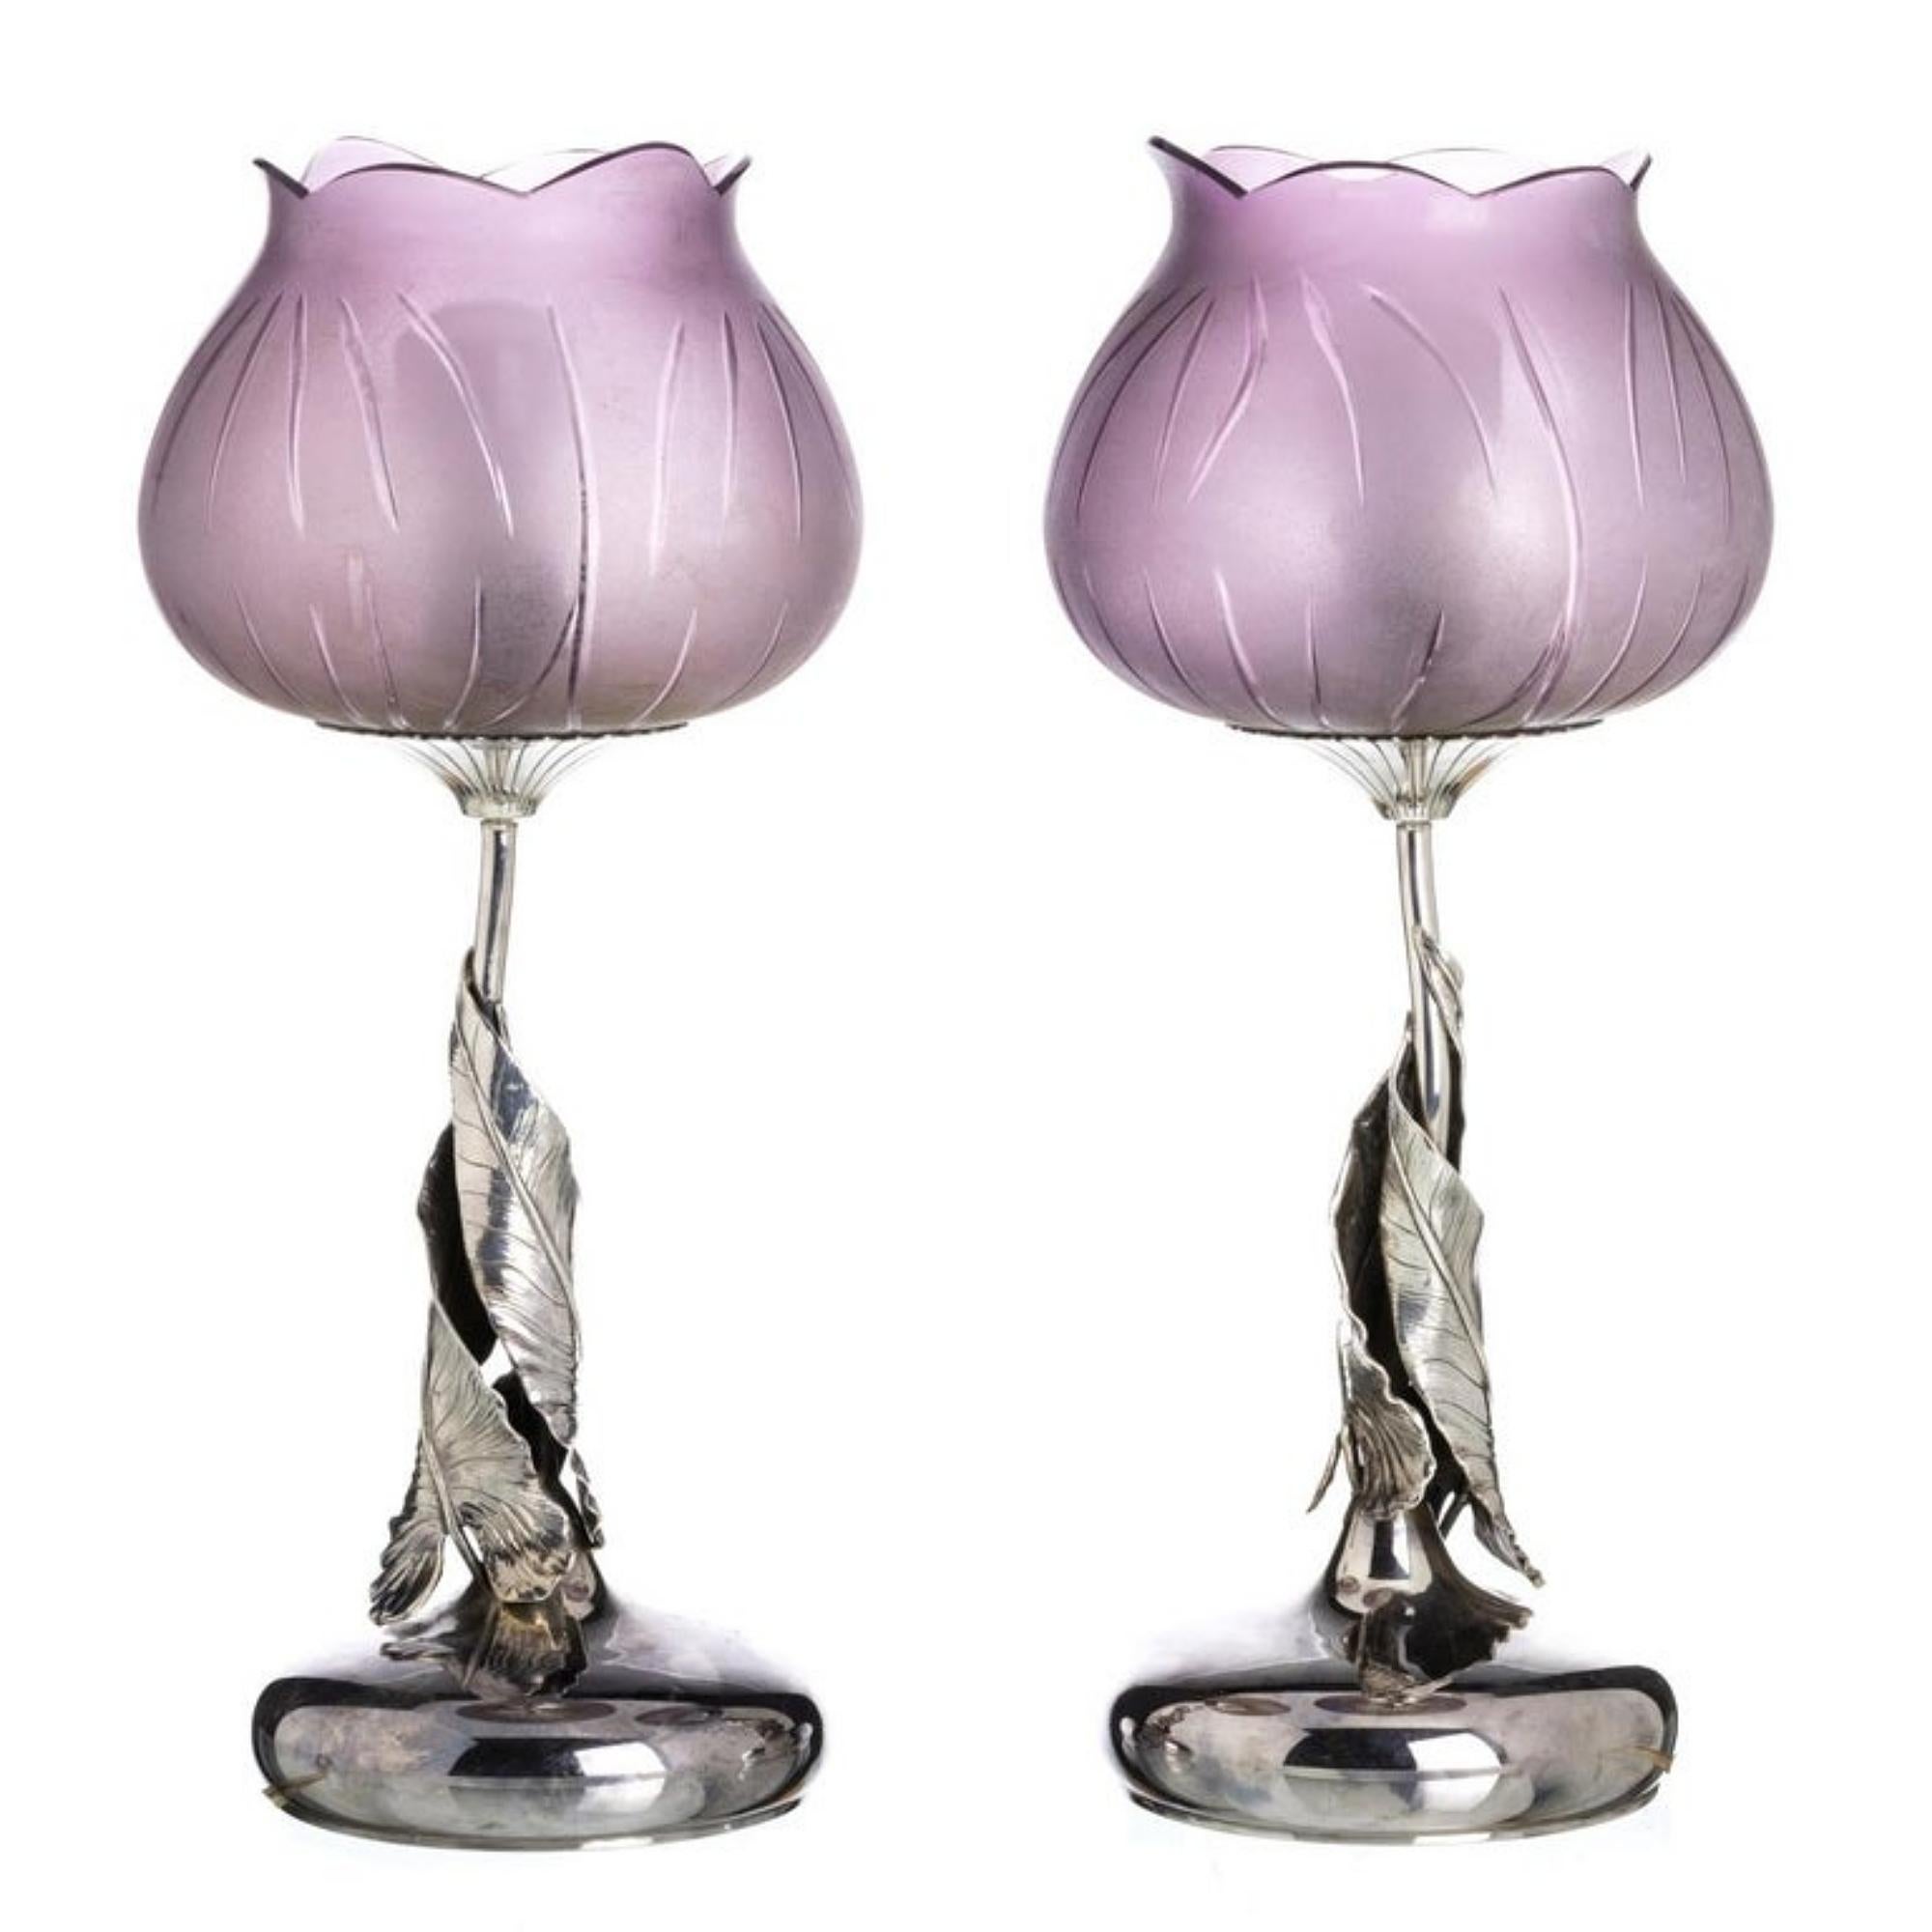 Pair of Italian Art Nouveau silver and glass lamps.
20th century, 
Art Nouveau style, with circular bases with stem with foliage of vases and bells in lilac glass. 
Marked with 925 thousandths. 
Dim. Height: 40 cm.